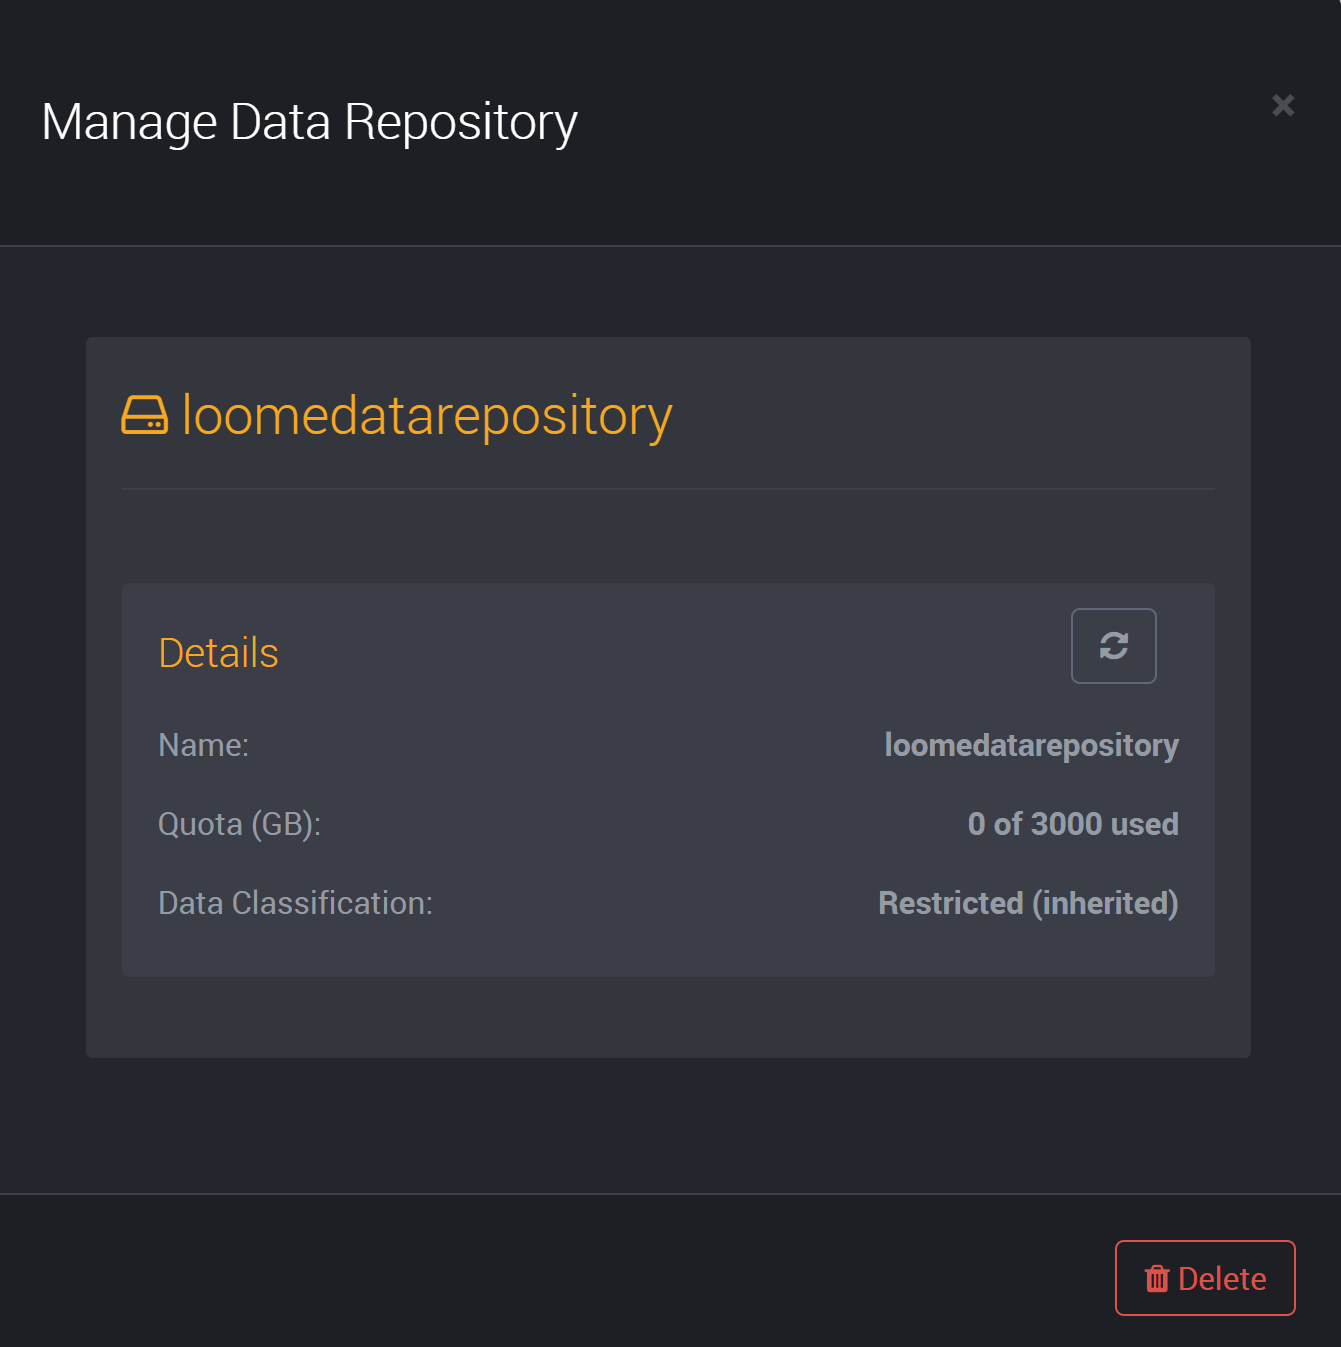 View the details of your data repository